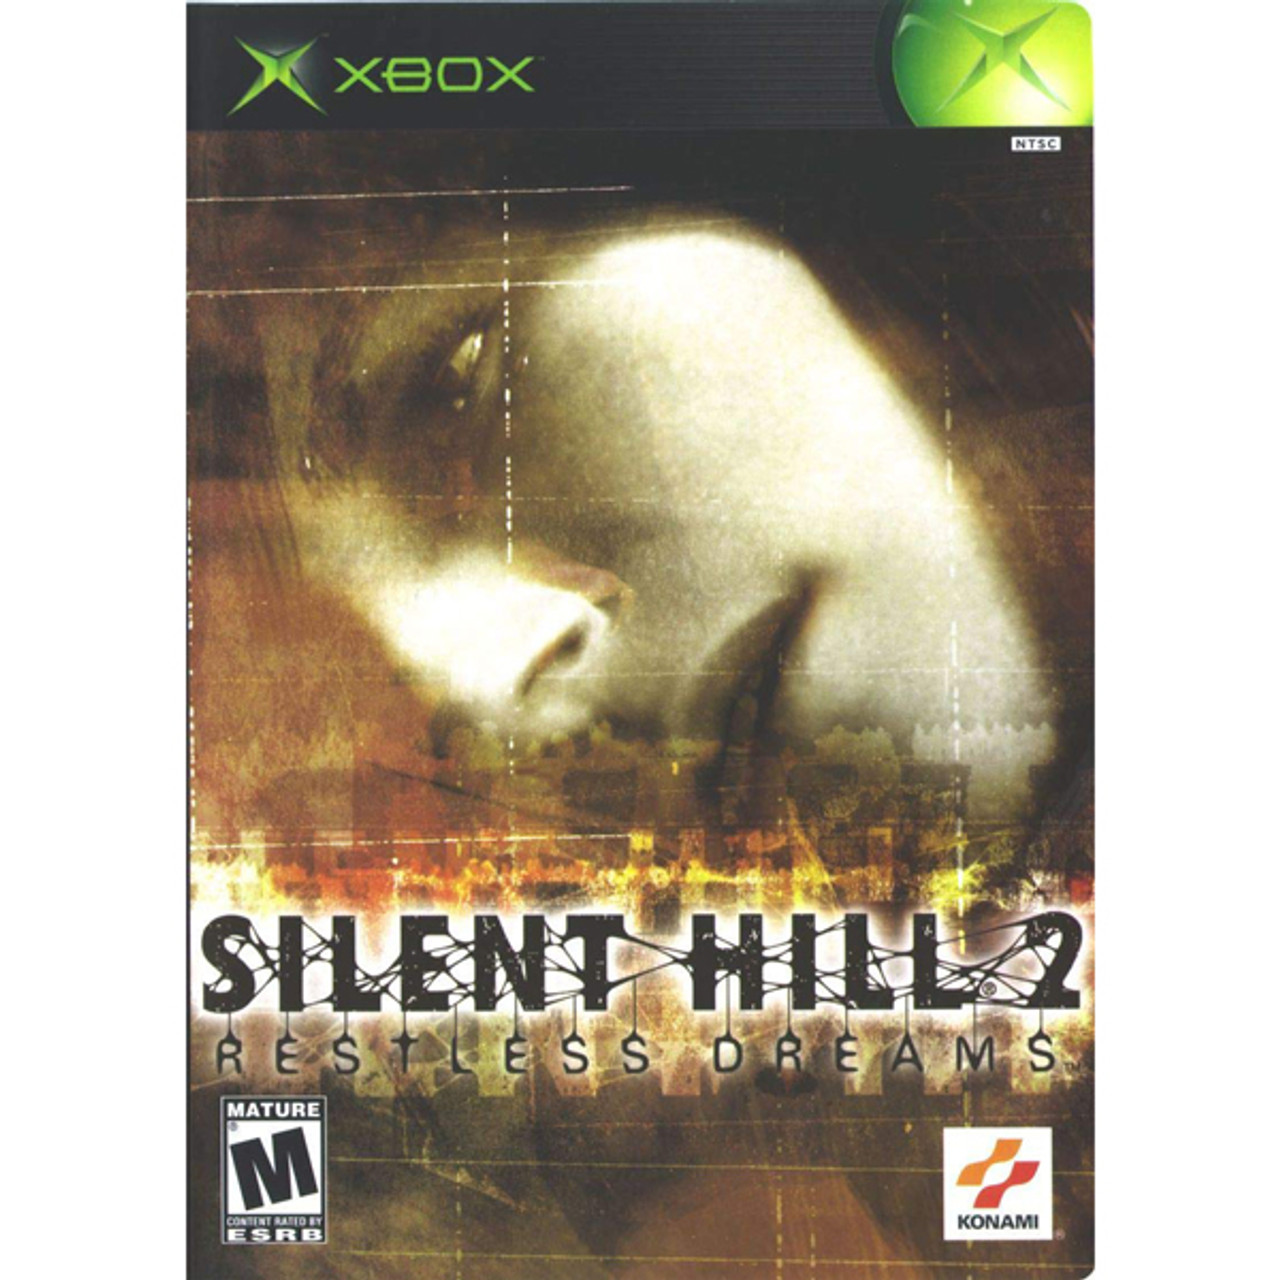 Silent Hill 2:Restless Dreams Xbox Game For Sale